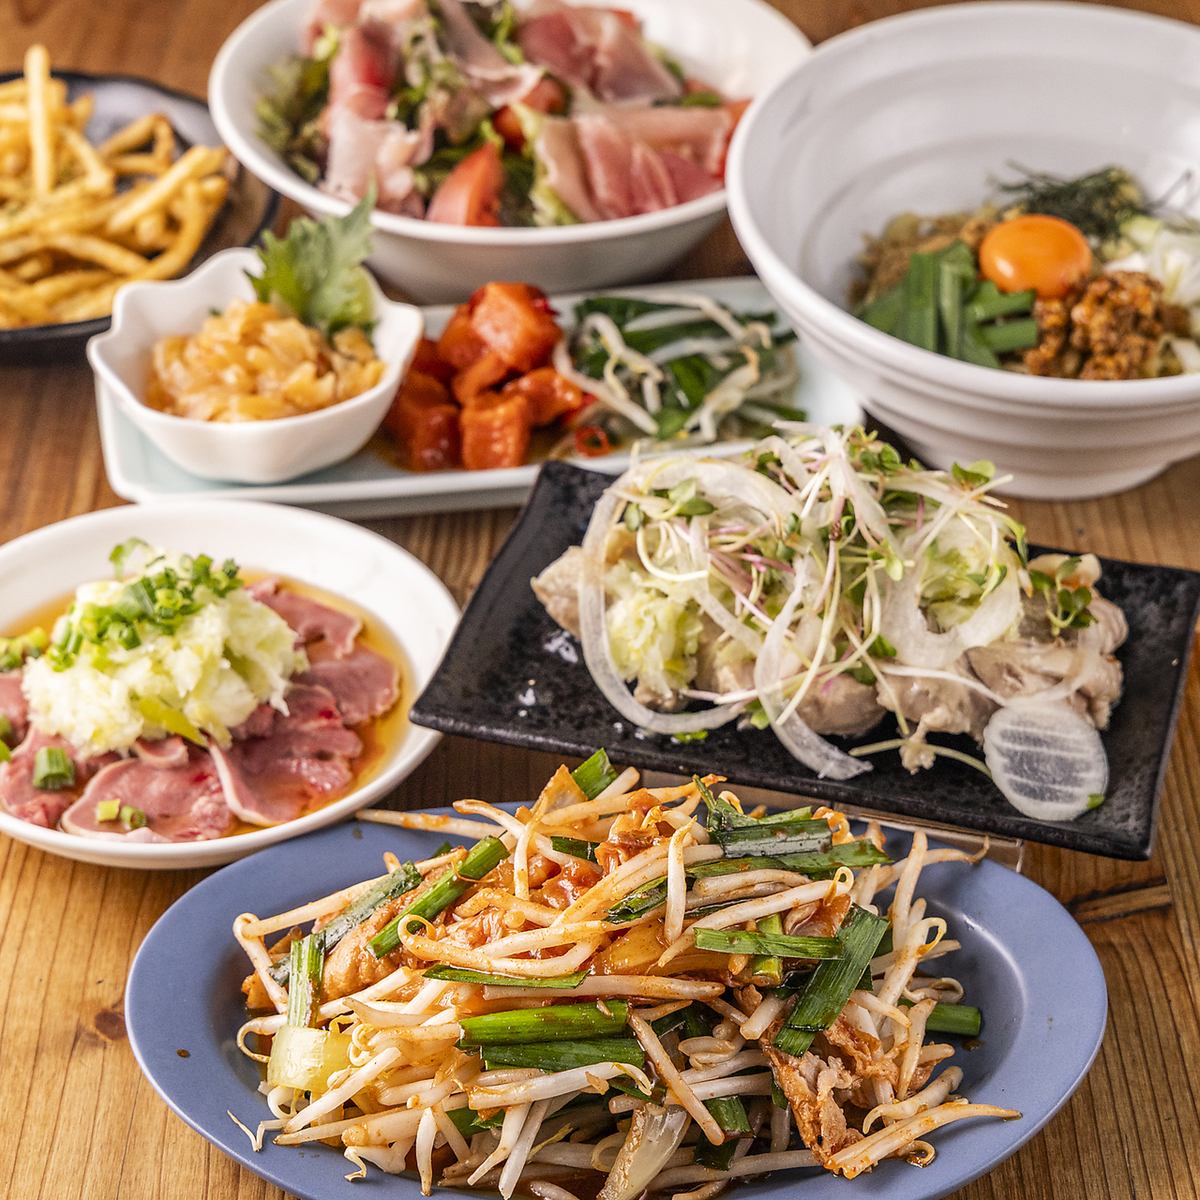 All 8 dishes and 2 hours of all-you-can-drink included♪ 2,800 yen (tax included) with coupon!